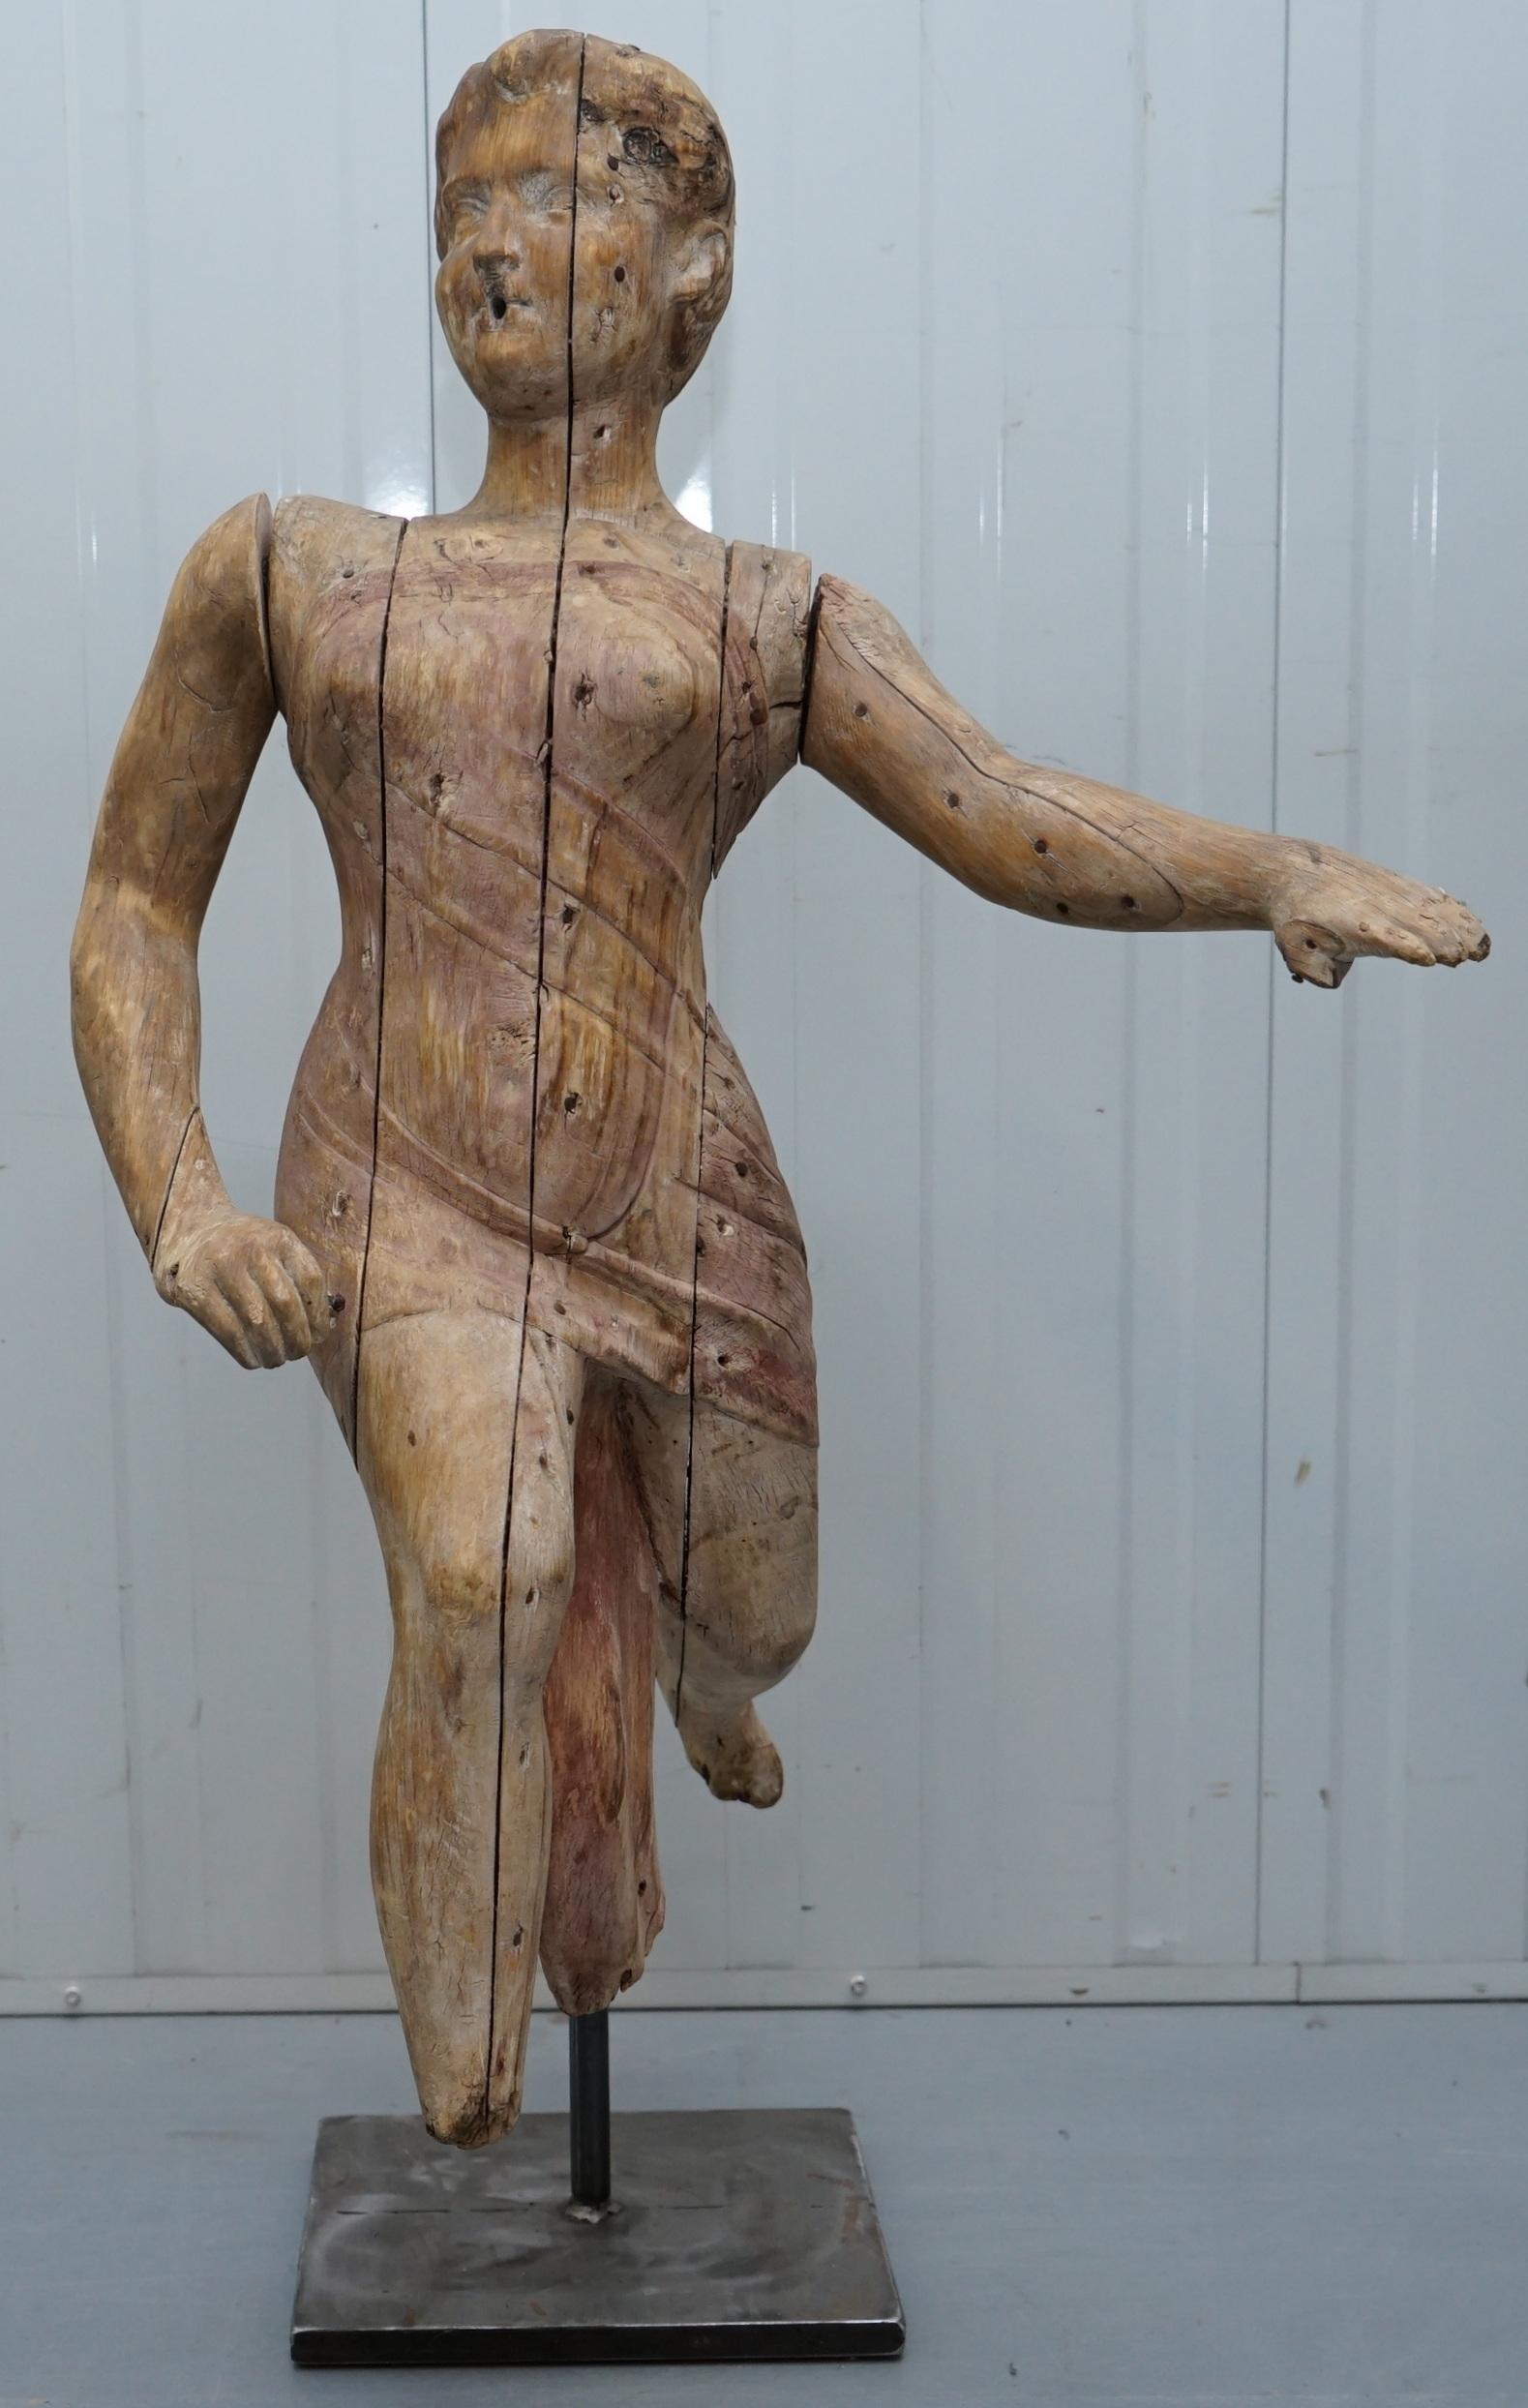 We are delighted to offer for sale this exceptionally rare late 18th early 19th-century hand carved wood statue of an Angel with lovely movement and articulated arms

A truly stunning piece, I’ve only ever seen one other which is listed on 1stdibs